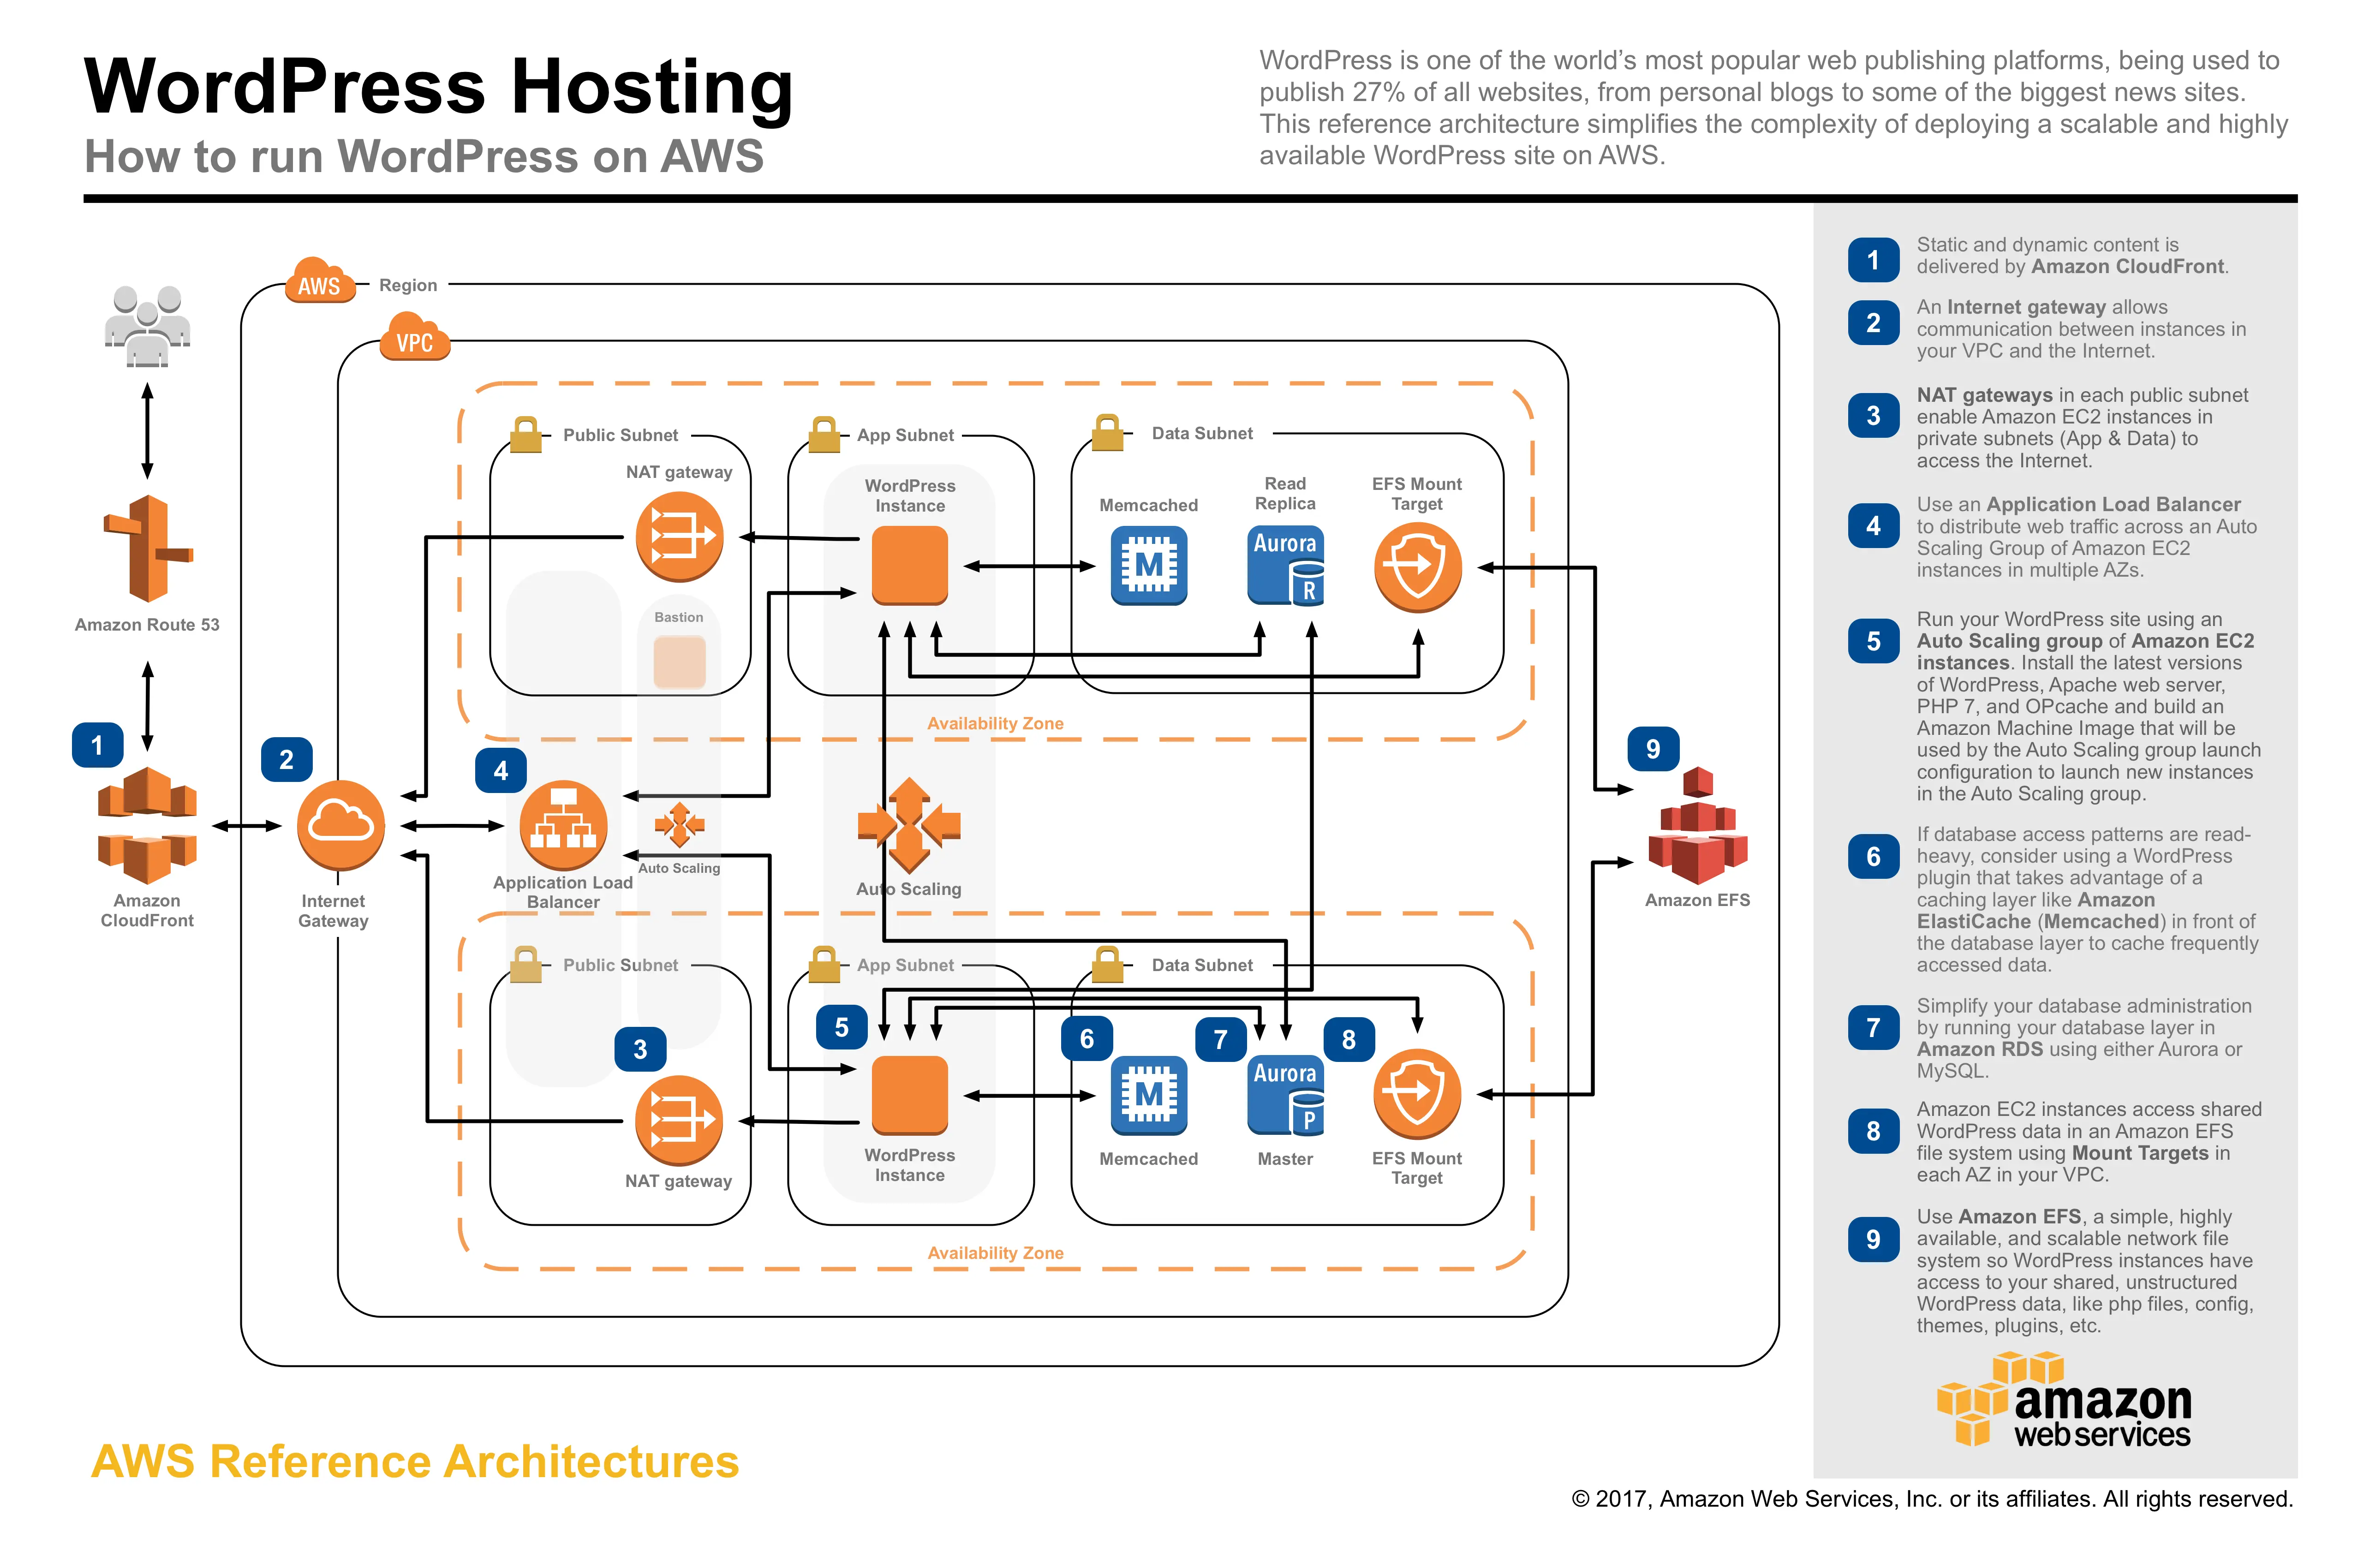 AWS Reference Architecture for WordPress hosting